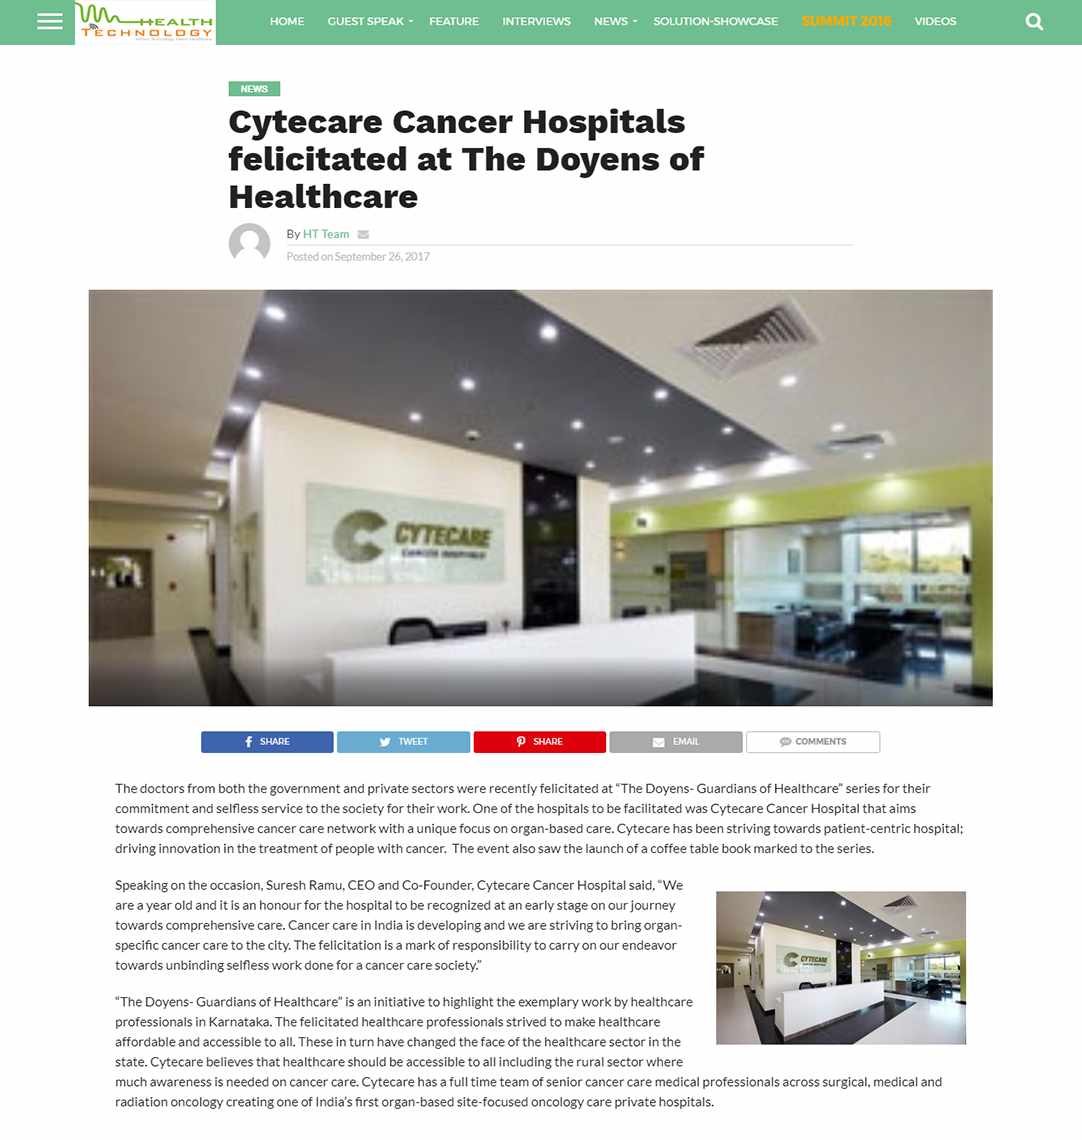 Cytecare Cancer Hospitals felicitated at The Doyens of Healthcare